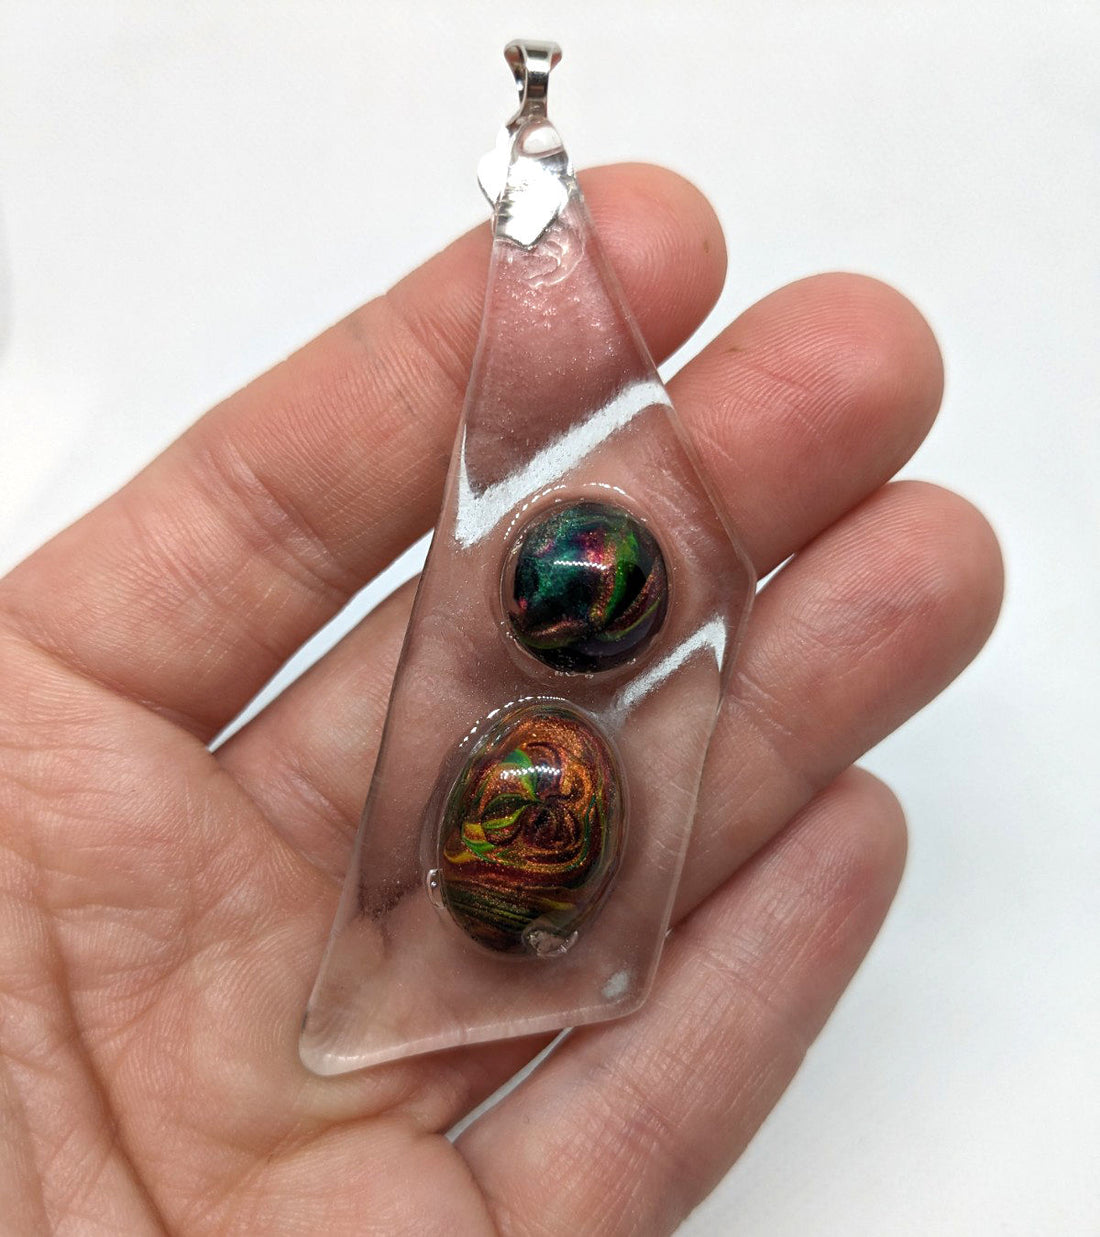 fused glass| acrylic paint skins| resin| pendant